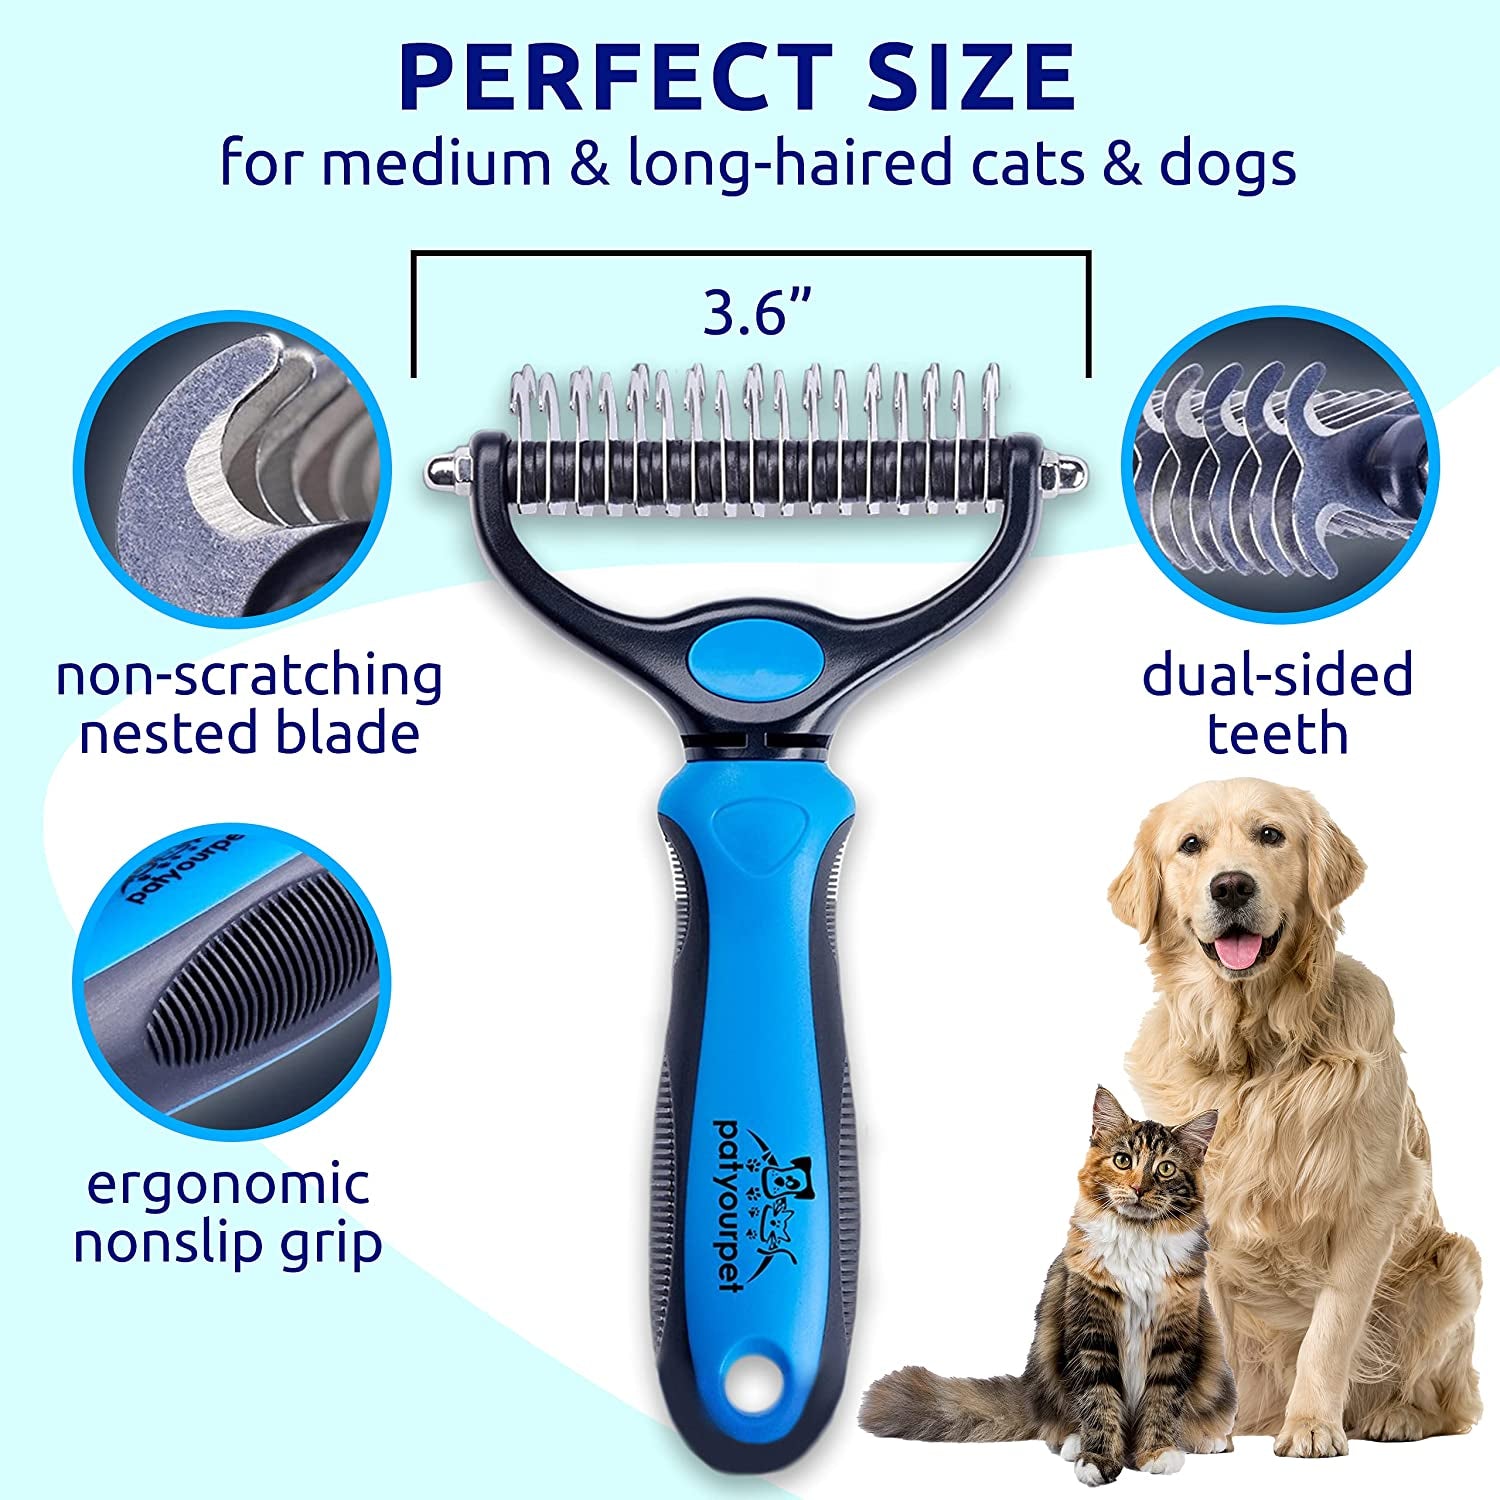 Deshedding Brush - Double-Sided Undercoat Rake for Dogs & Cats - Shedding Comb and Dematting Tool for Grooming, Extra Wide